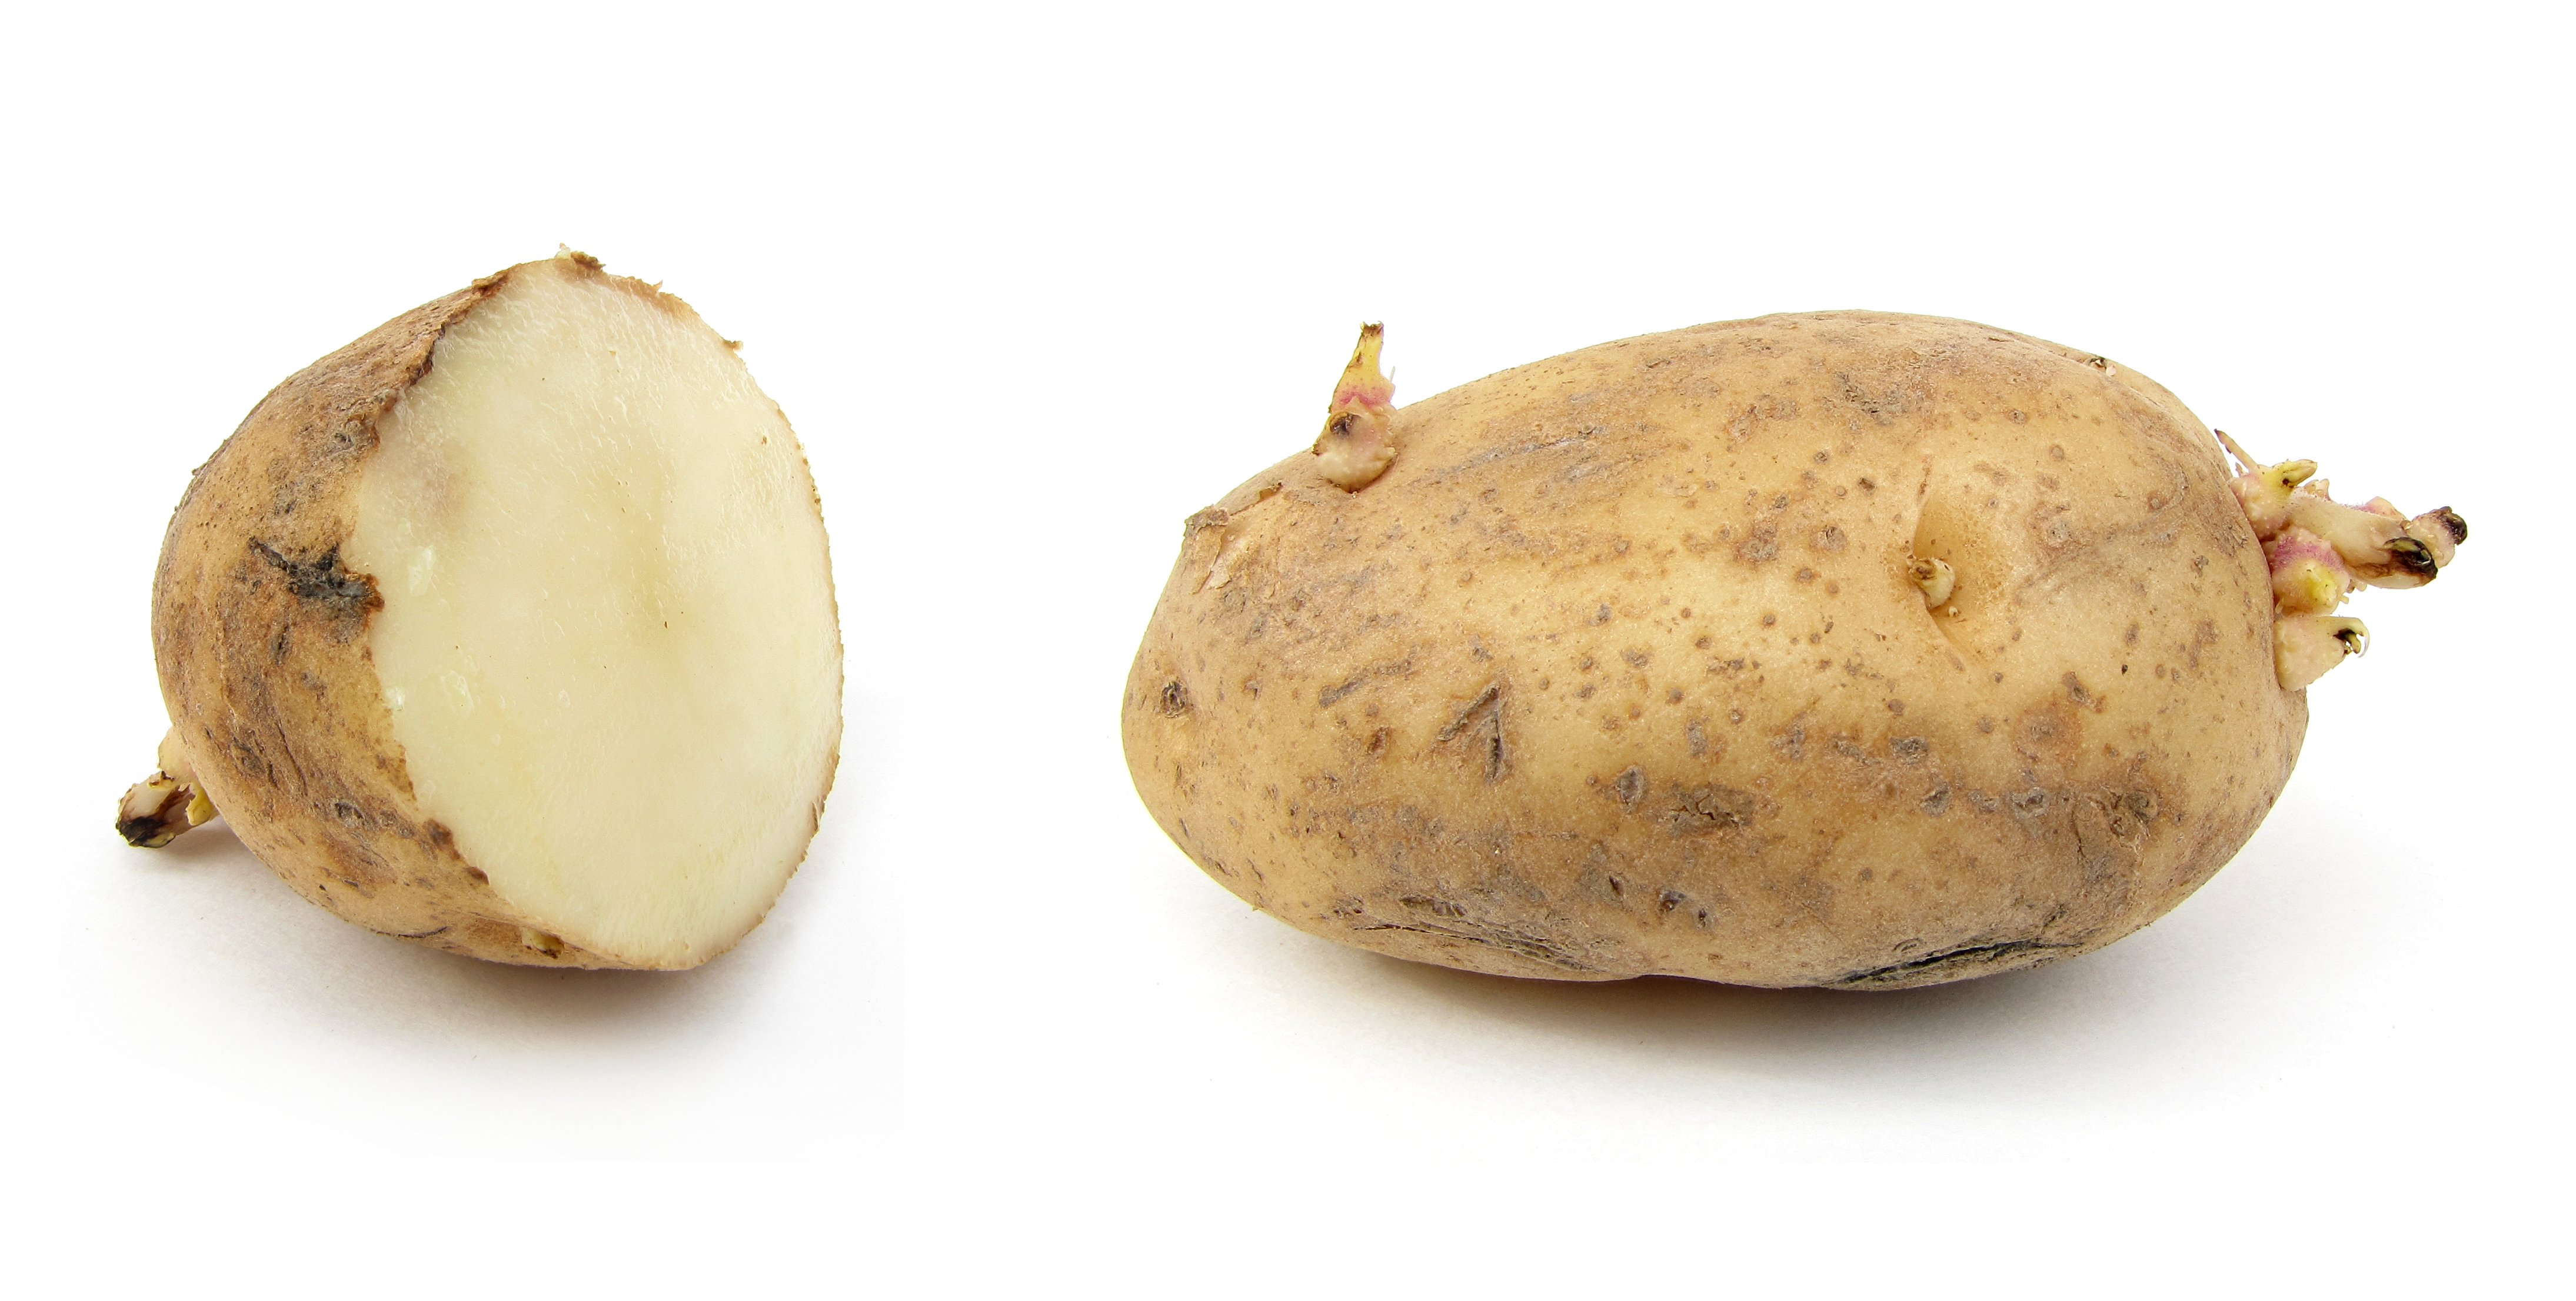 Russet_potato_cultivar_with_sprouts.jpg